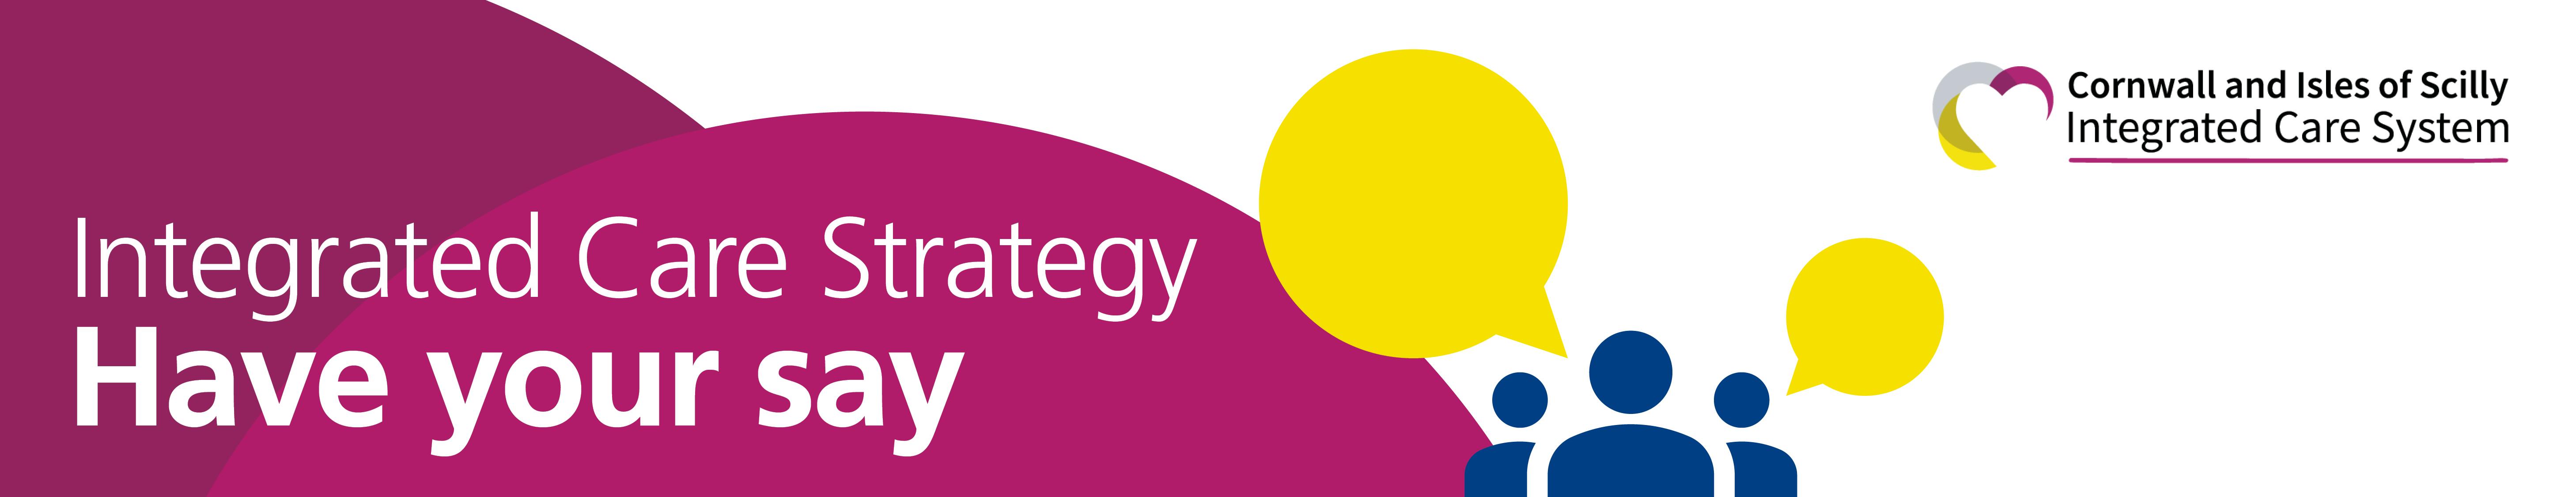 Share your views on the Integrated Care Strategy